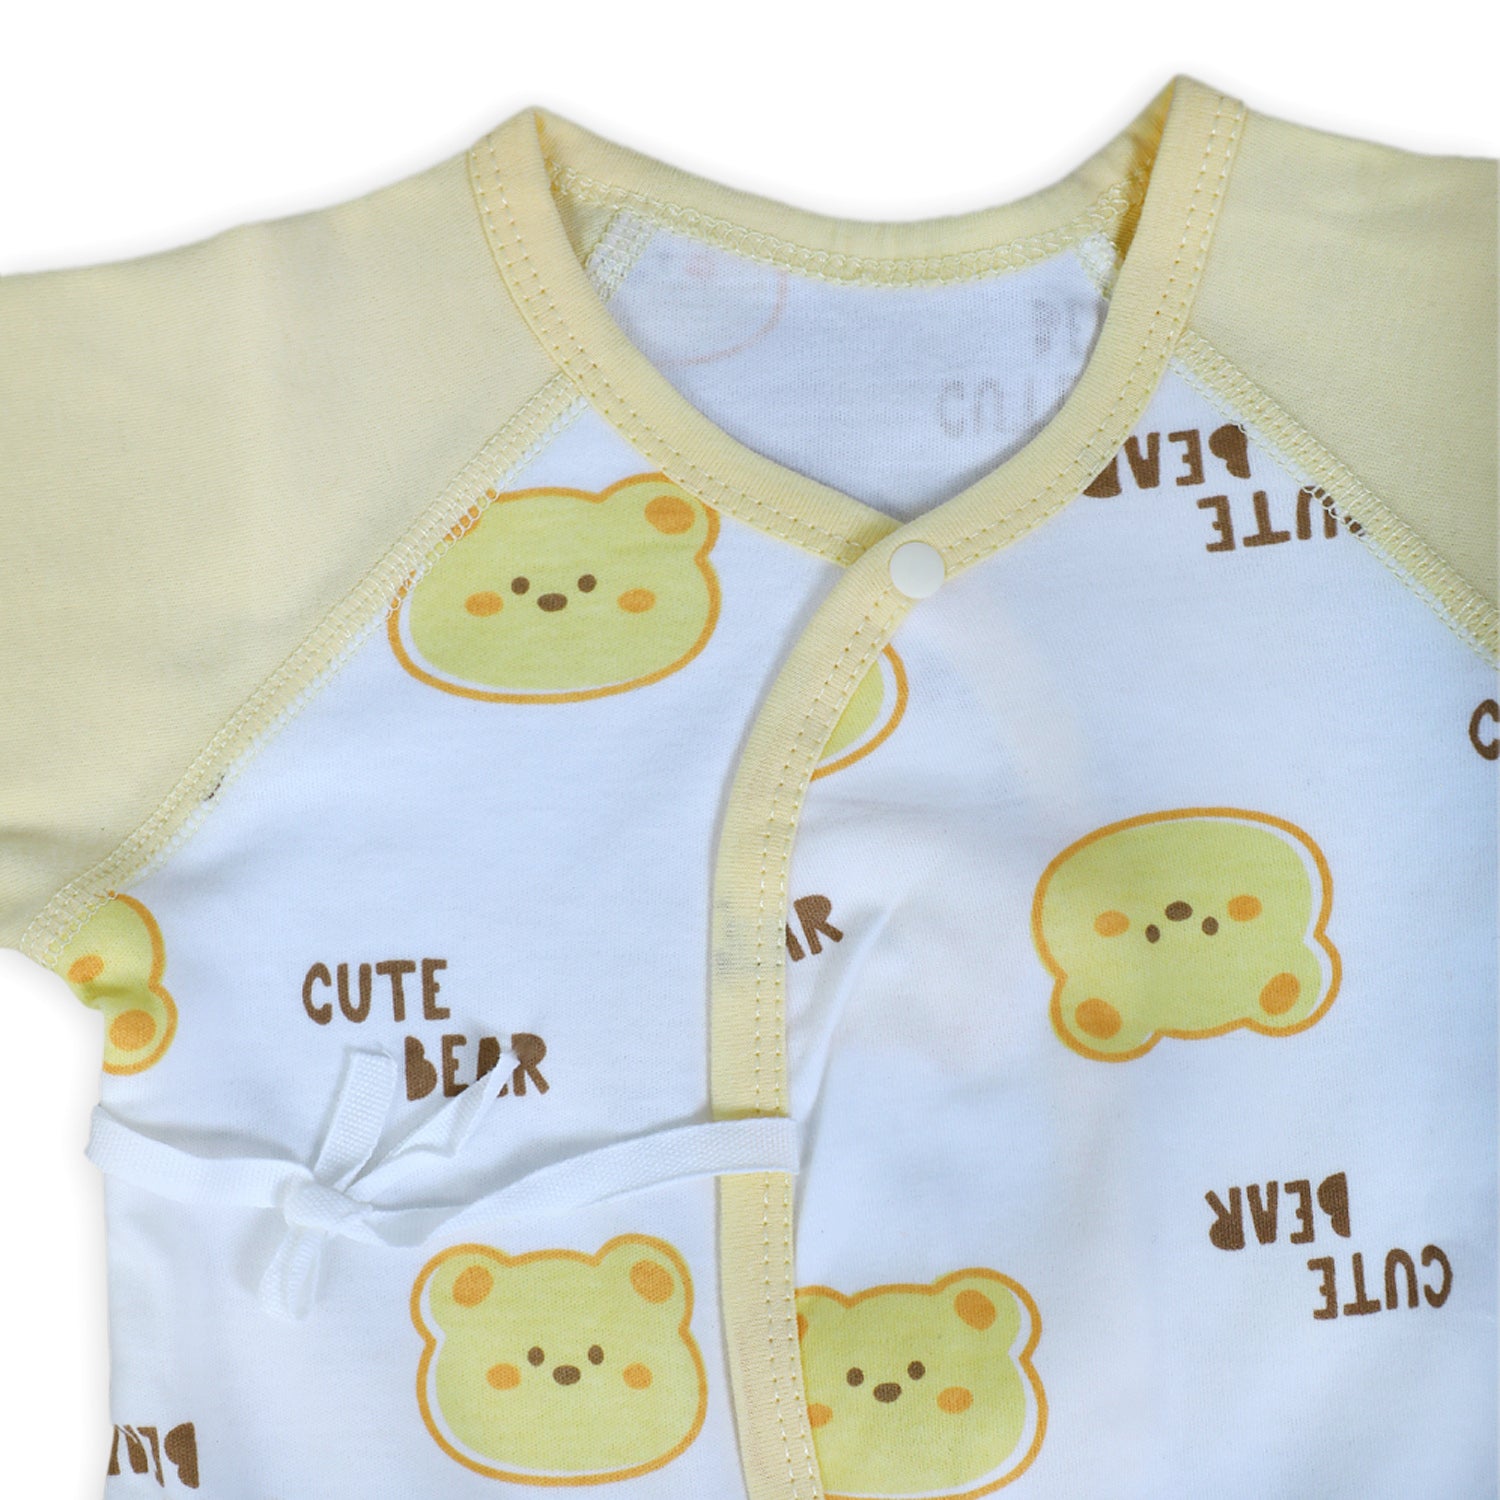 Cute Bear Full Sleeves One-Piece Body Suit With Snap Buttons Tie Knot And Matching Bib - Yellow - Baby Moo